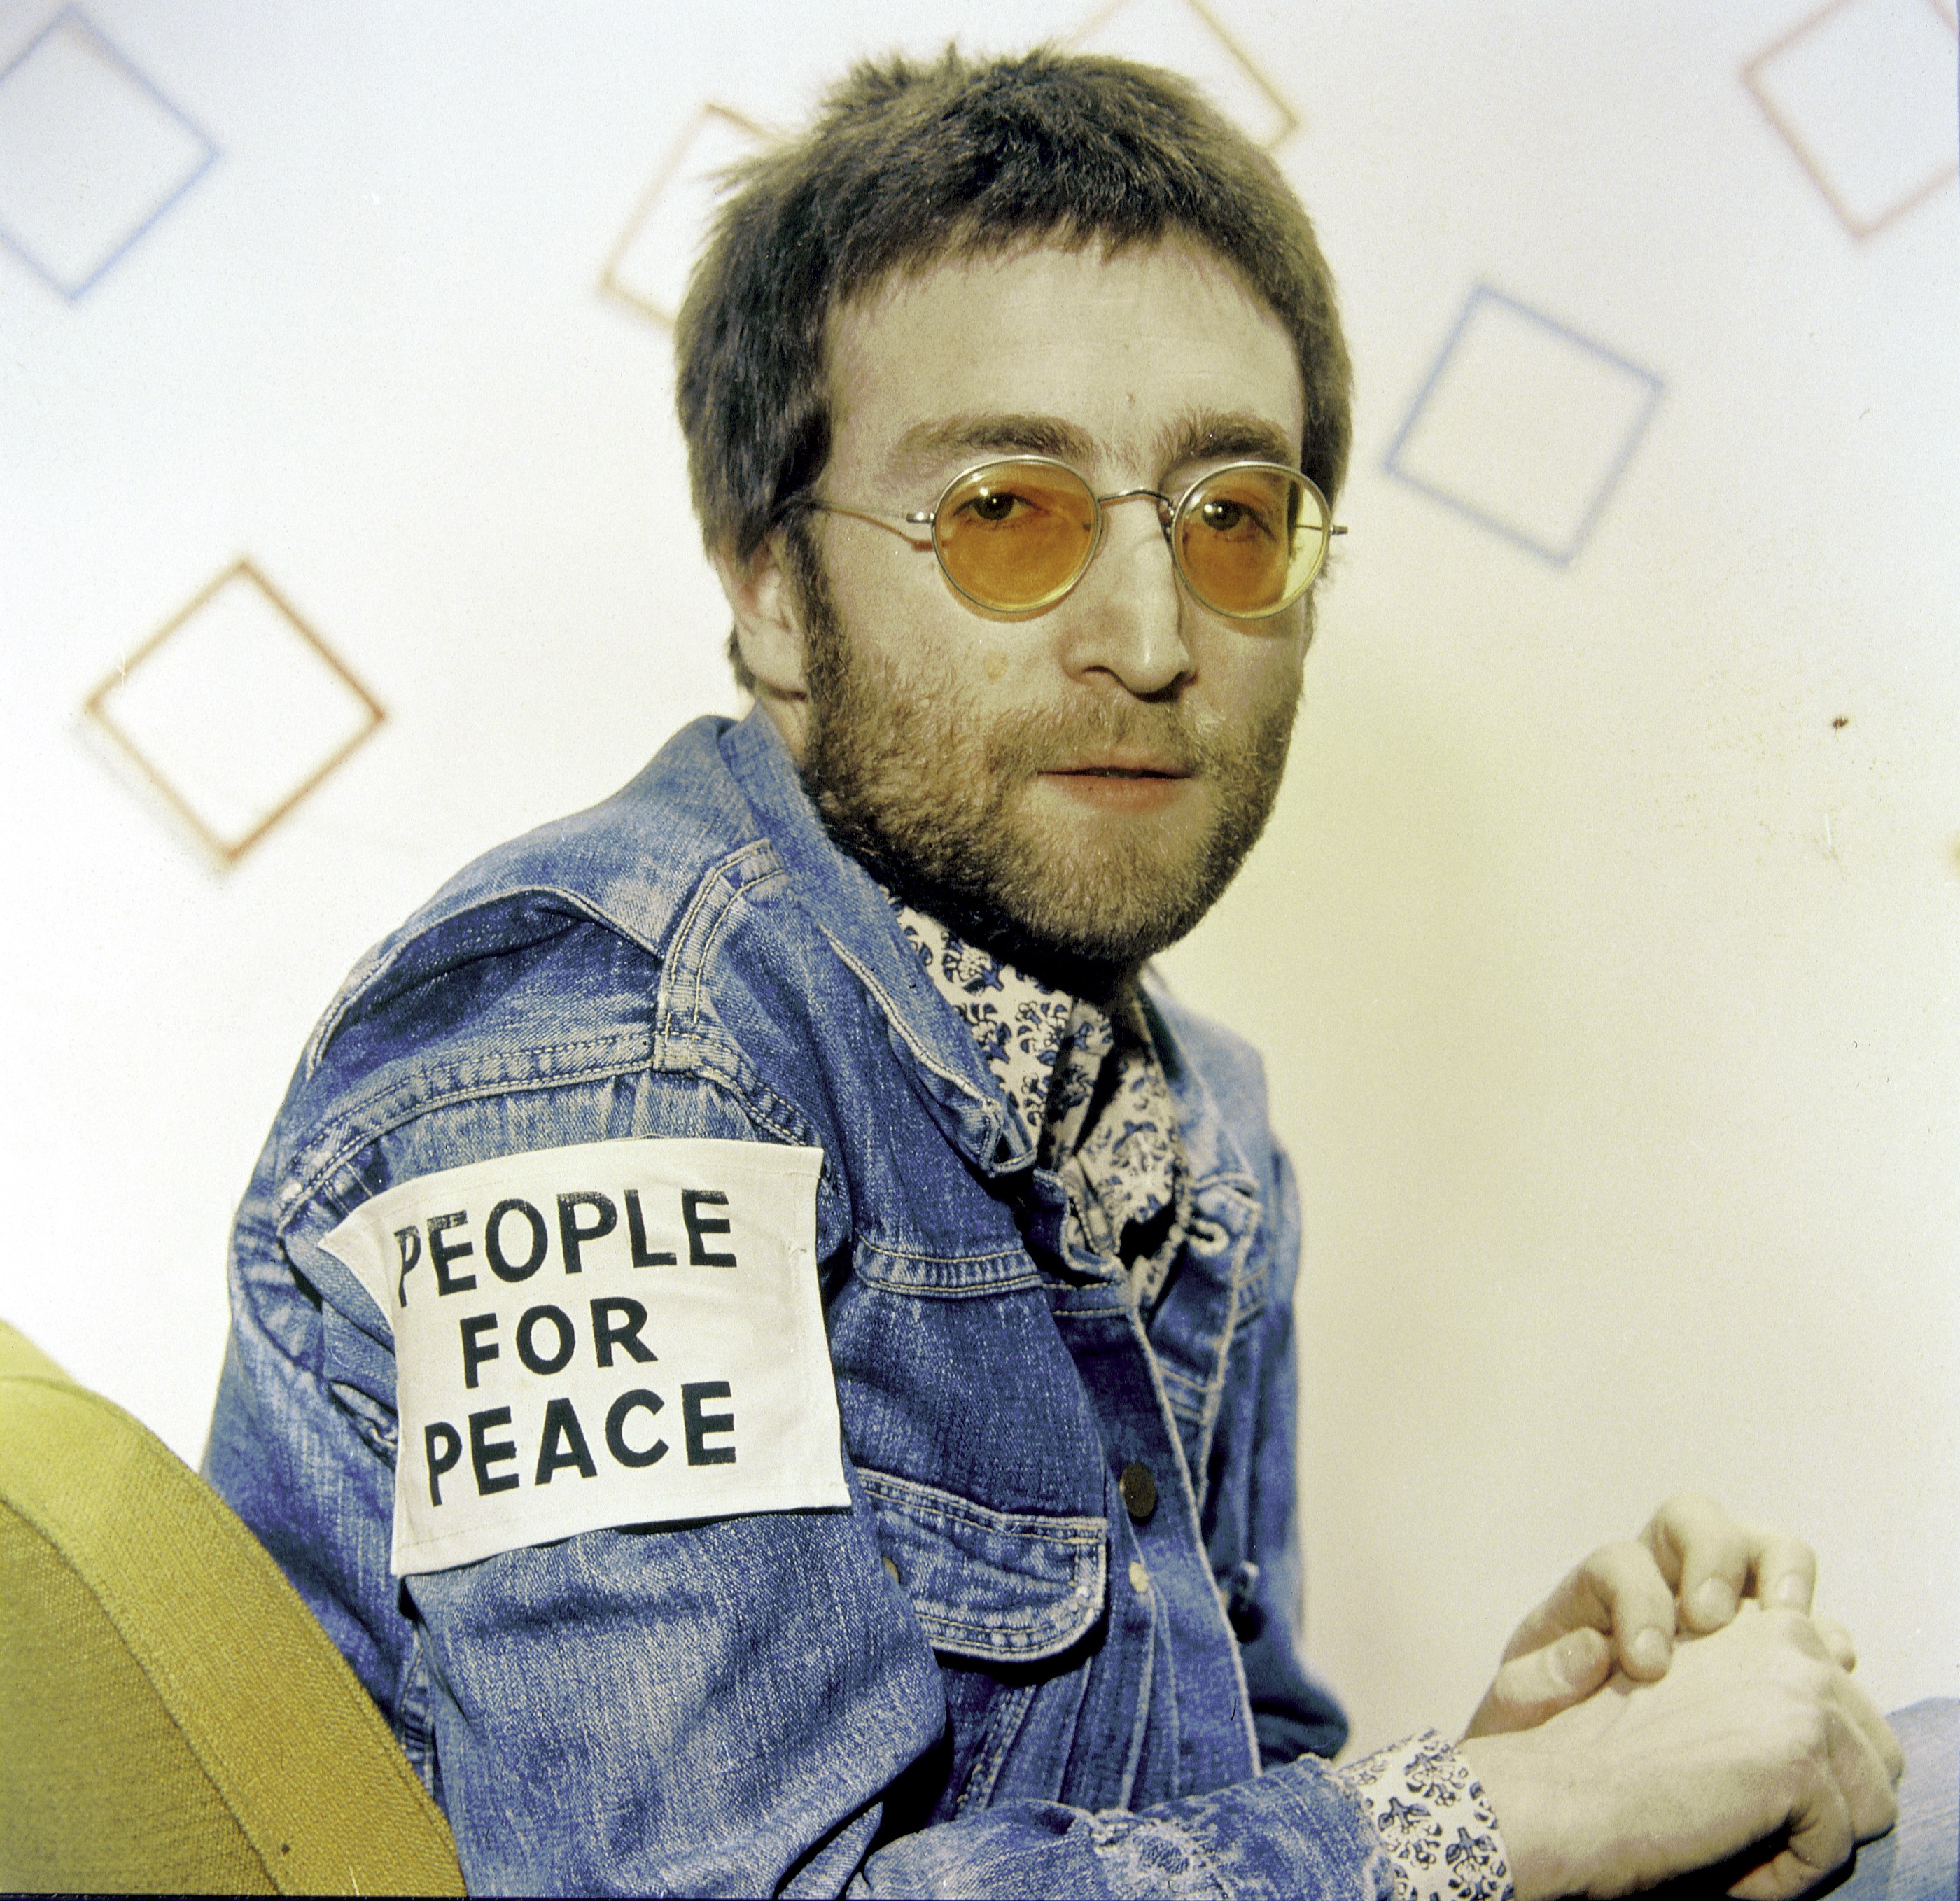 John Lennon wearing a "People for Peace" patch